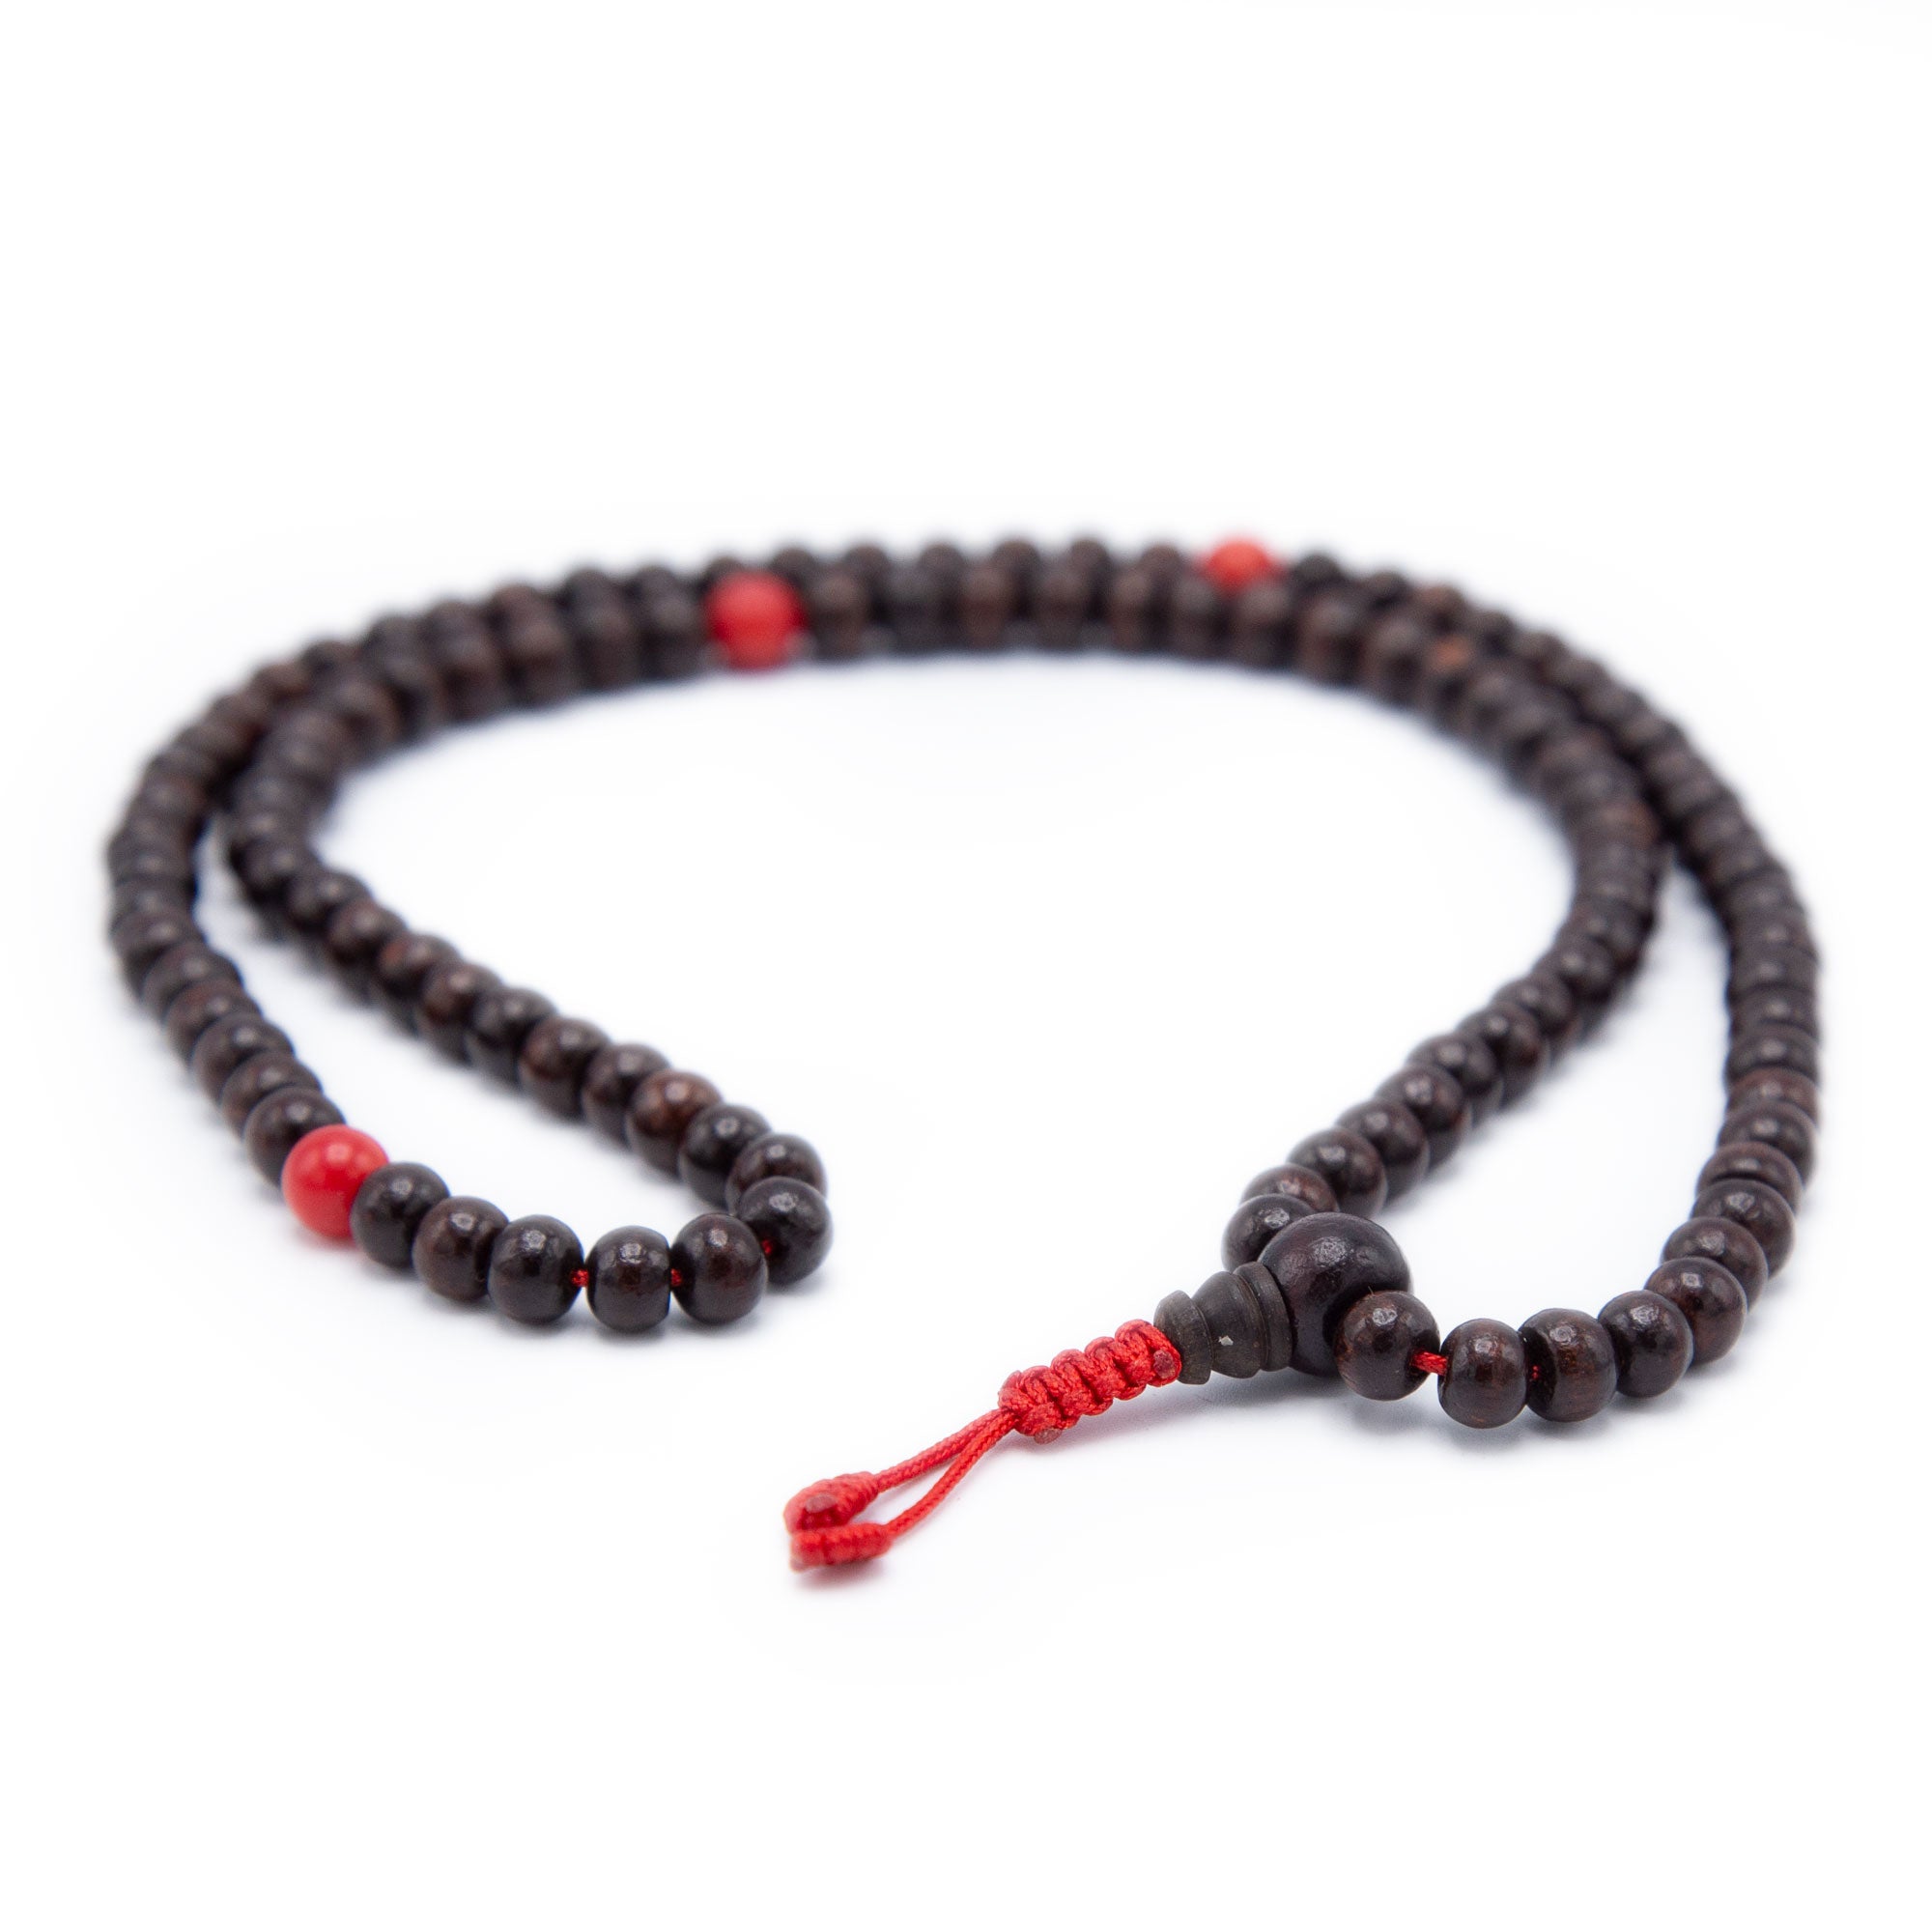 Rosewood and Round Coral Mala - 6mm